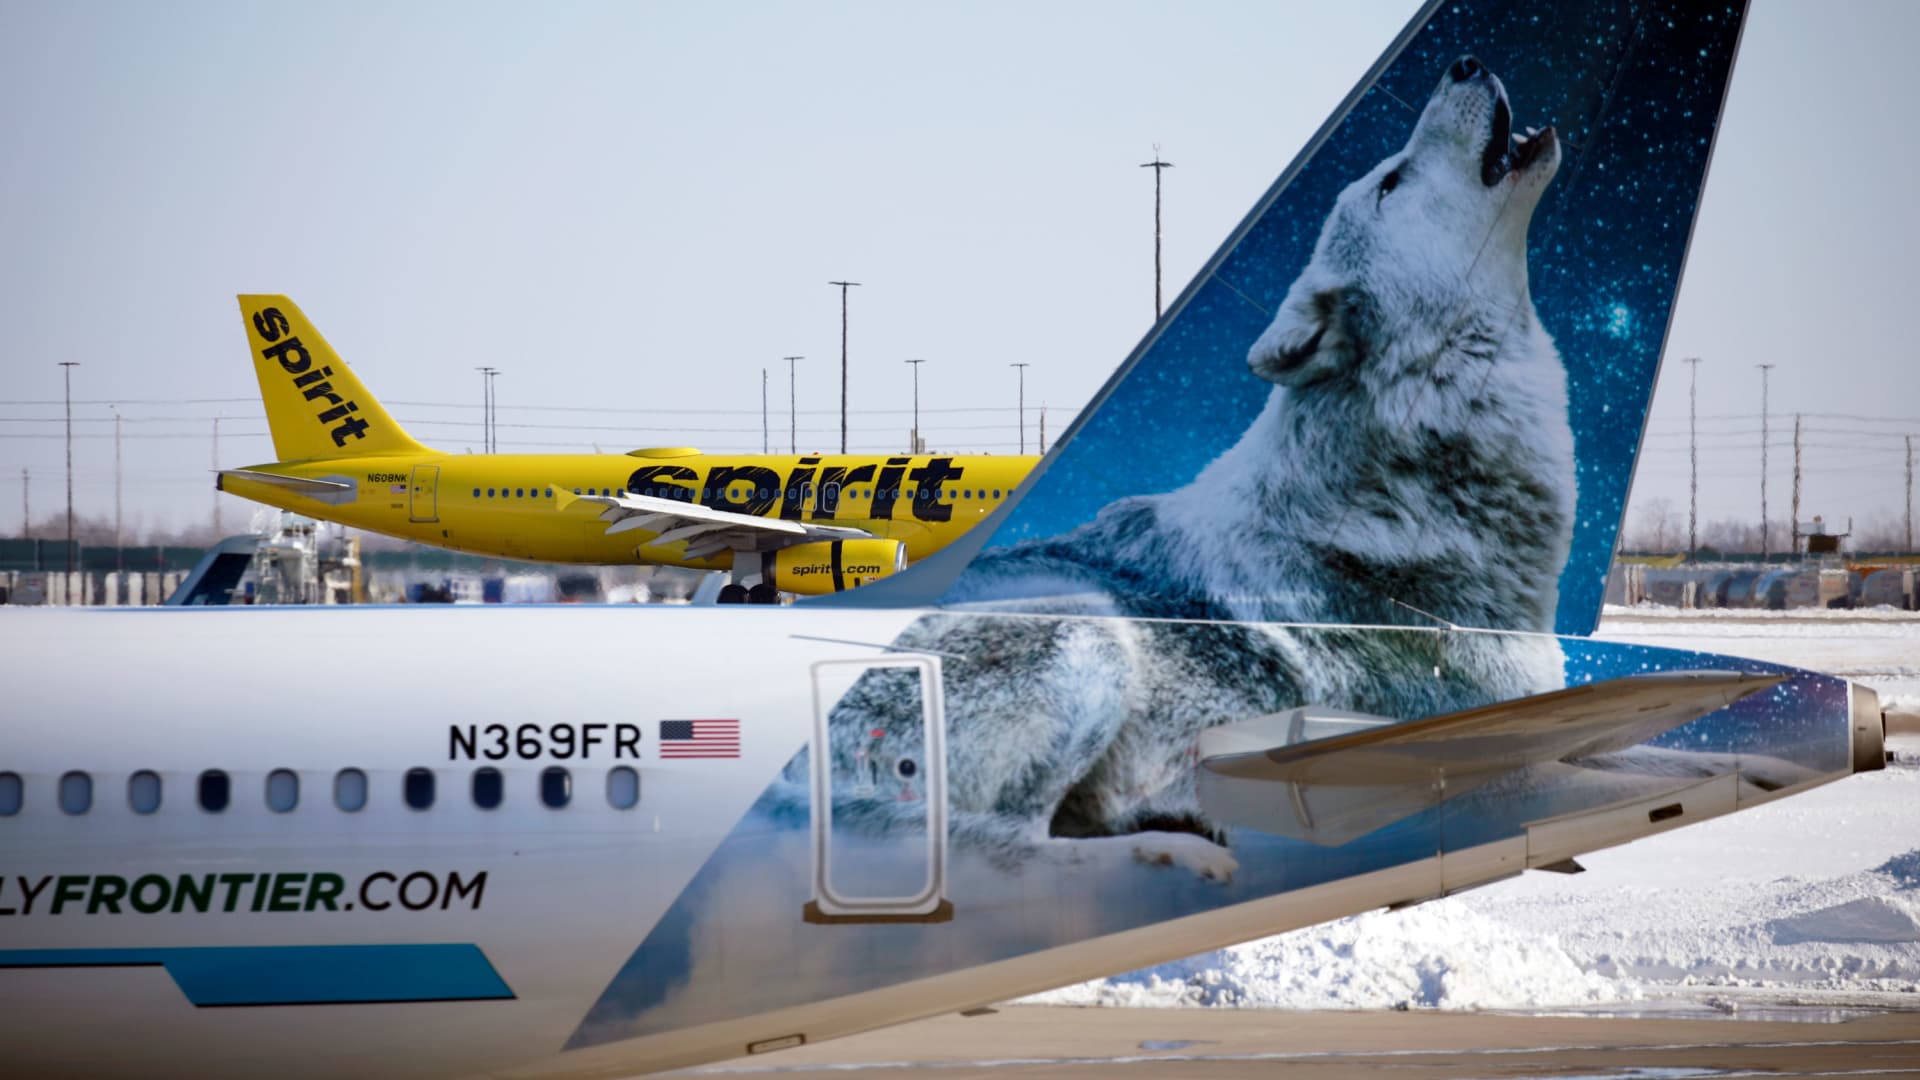 Spirit-Frontier merger in question after another vote delay, JetBlue circles